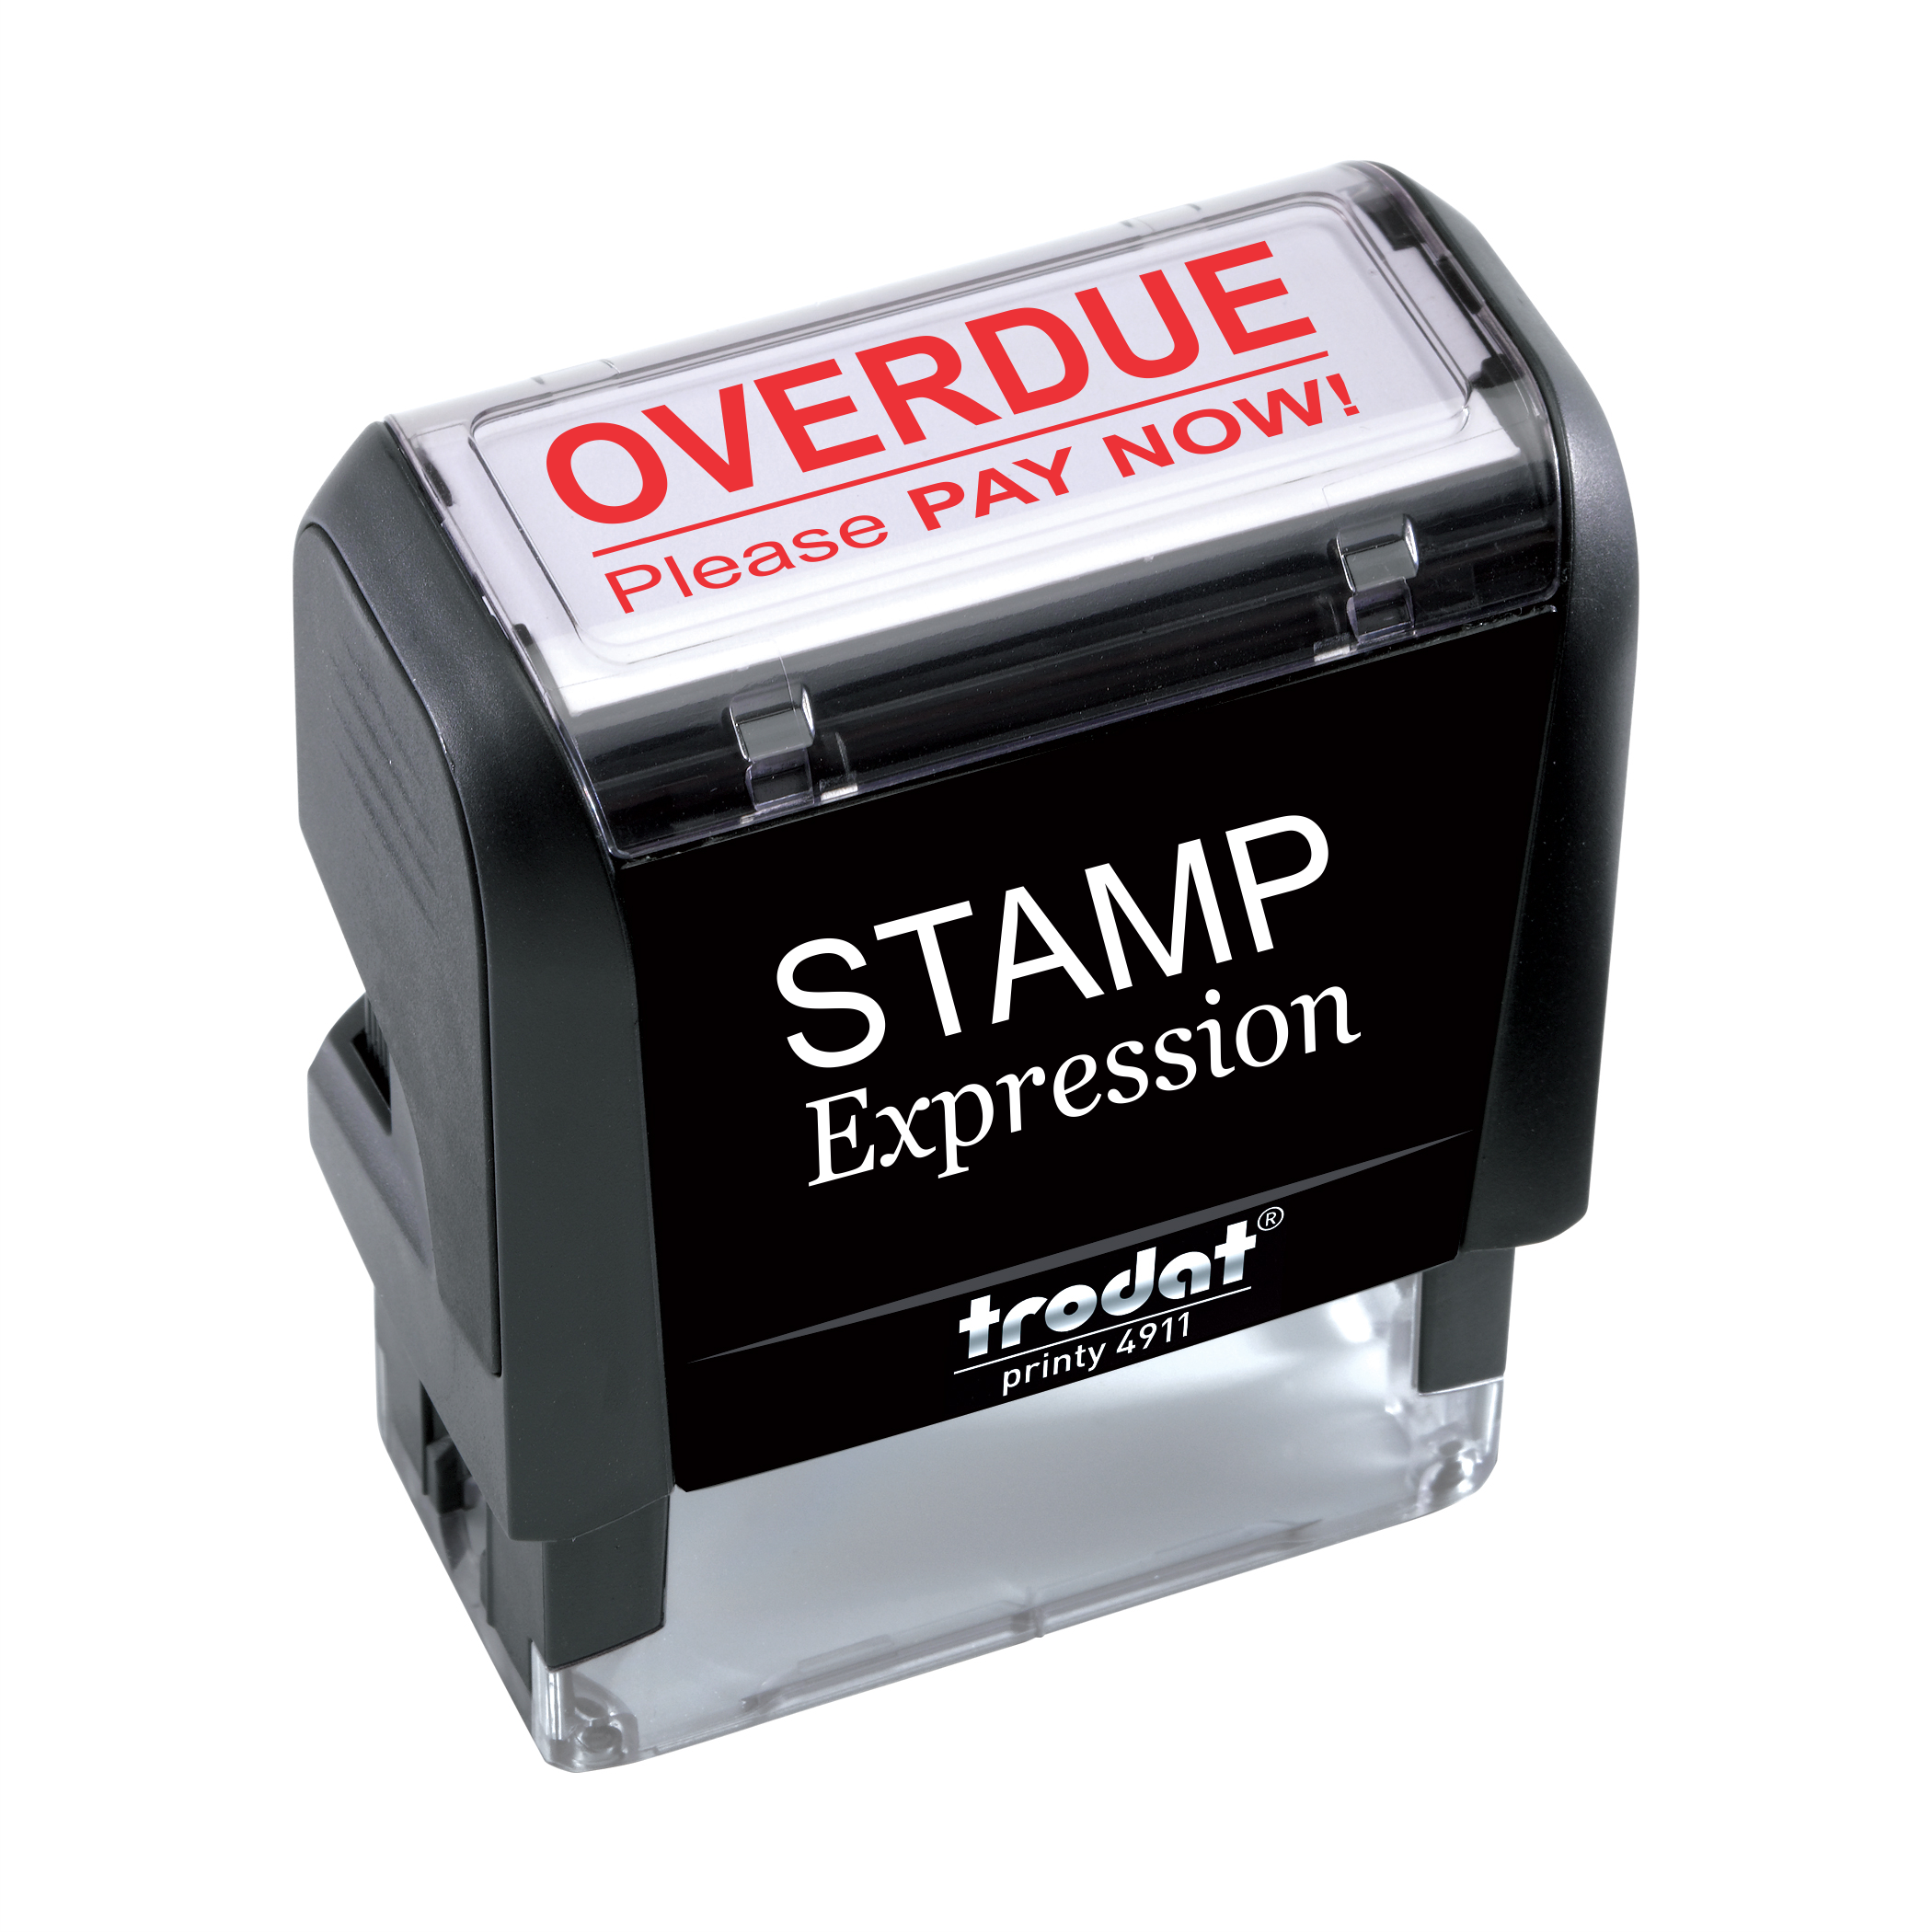 Overdue Please Pay Now Office Self Inking Rubber Past Due Stamp